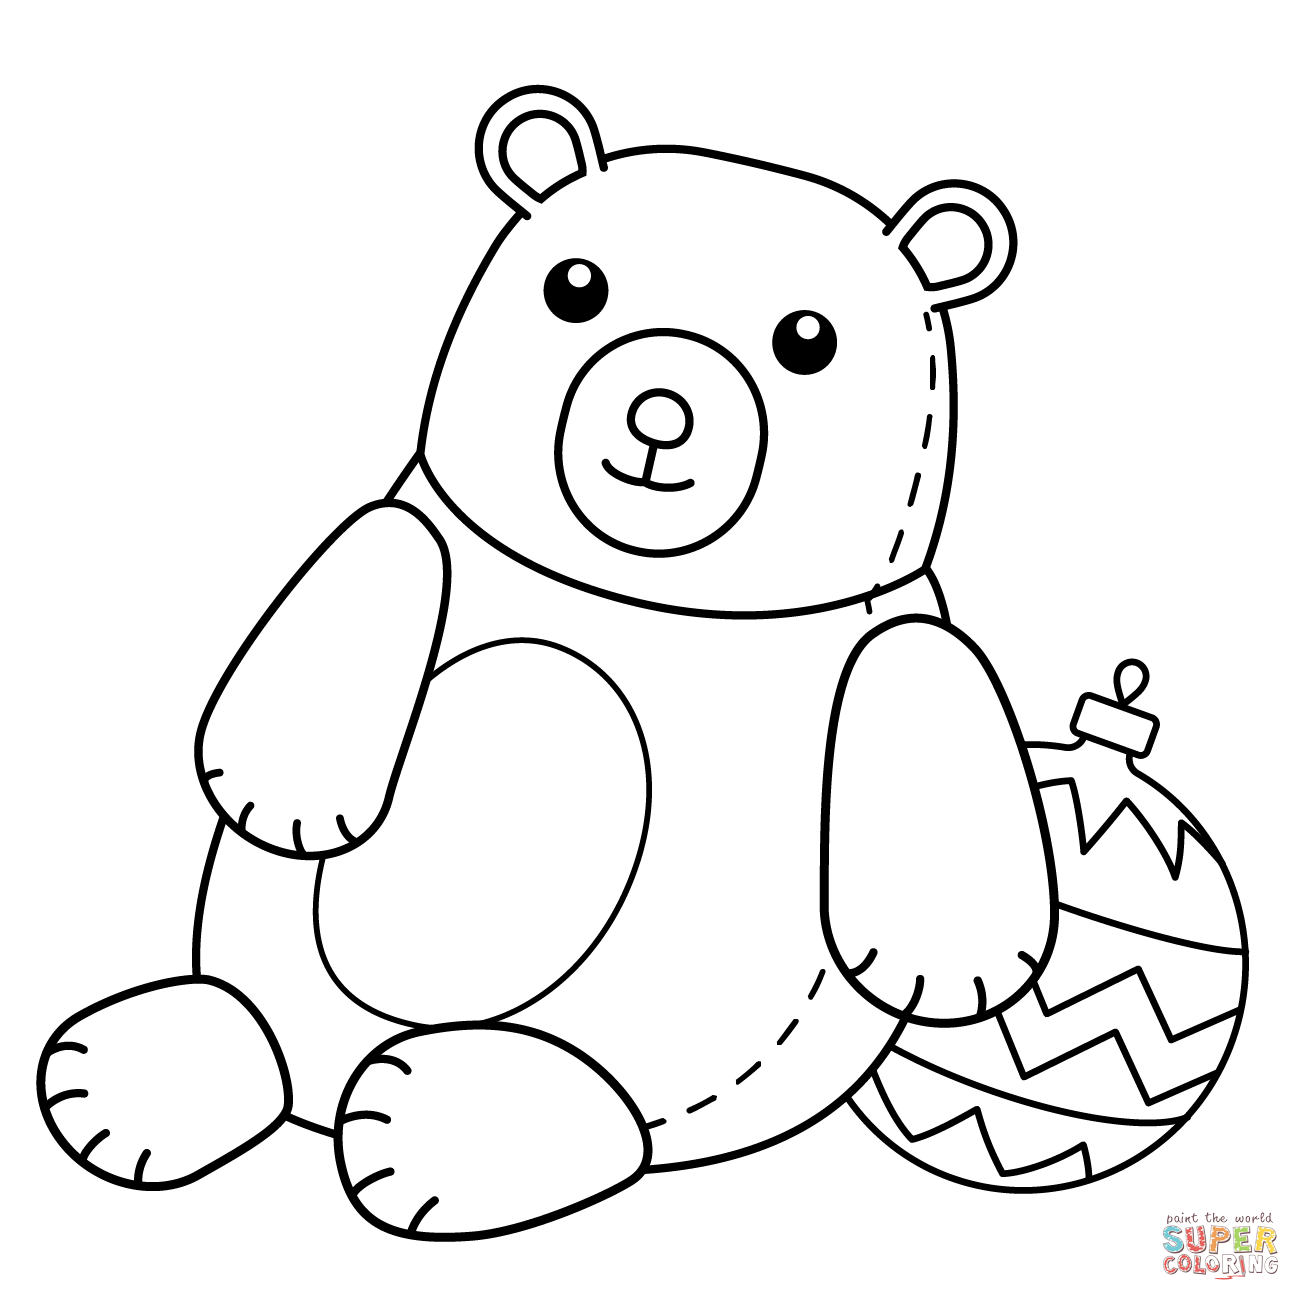 Christmas teddy bear coloring page free printable coloring pages